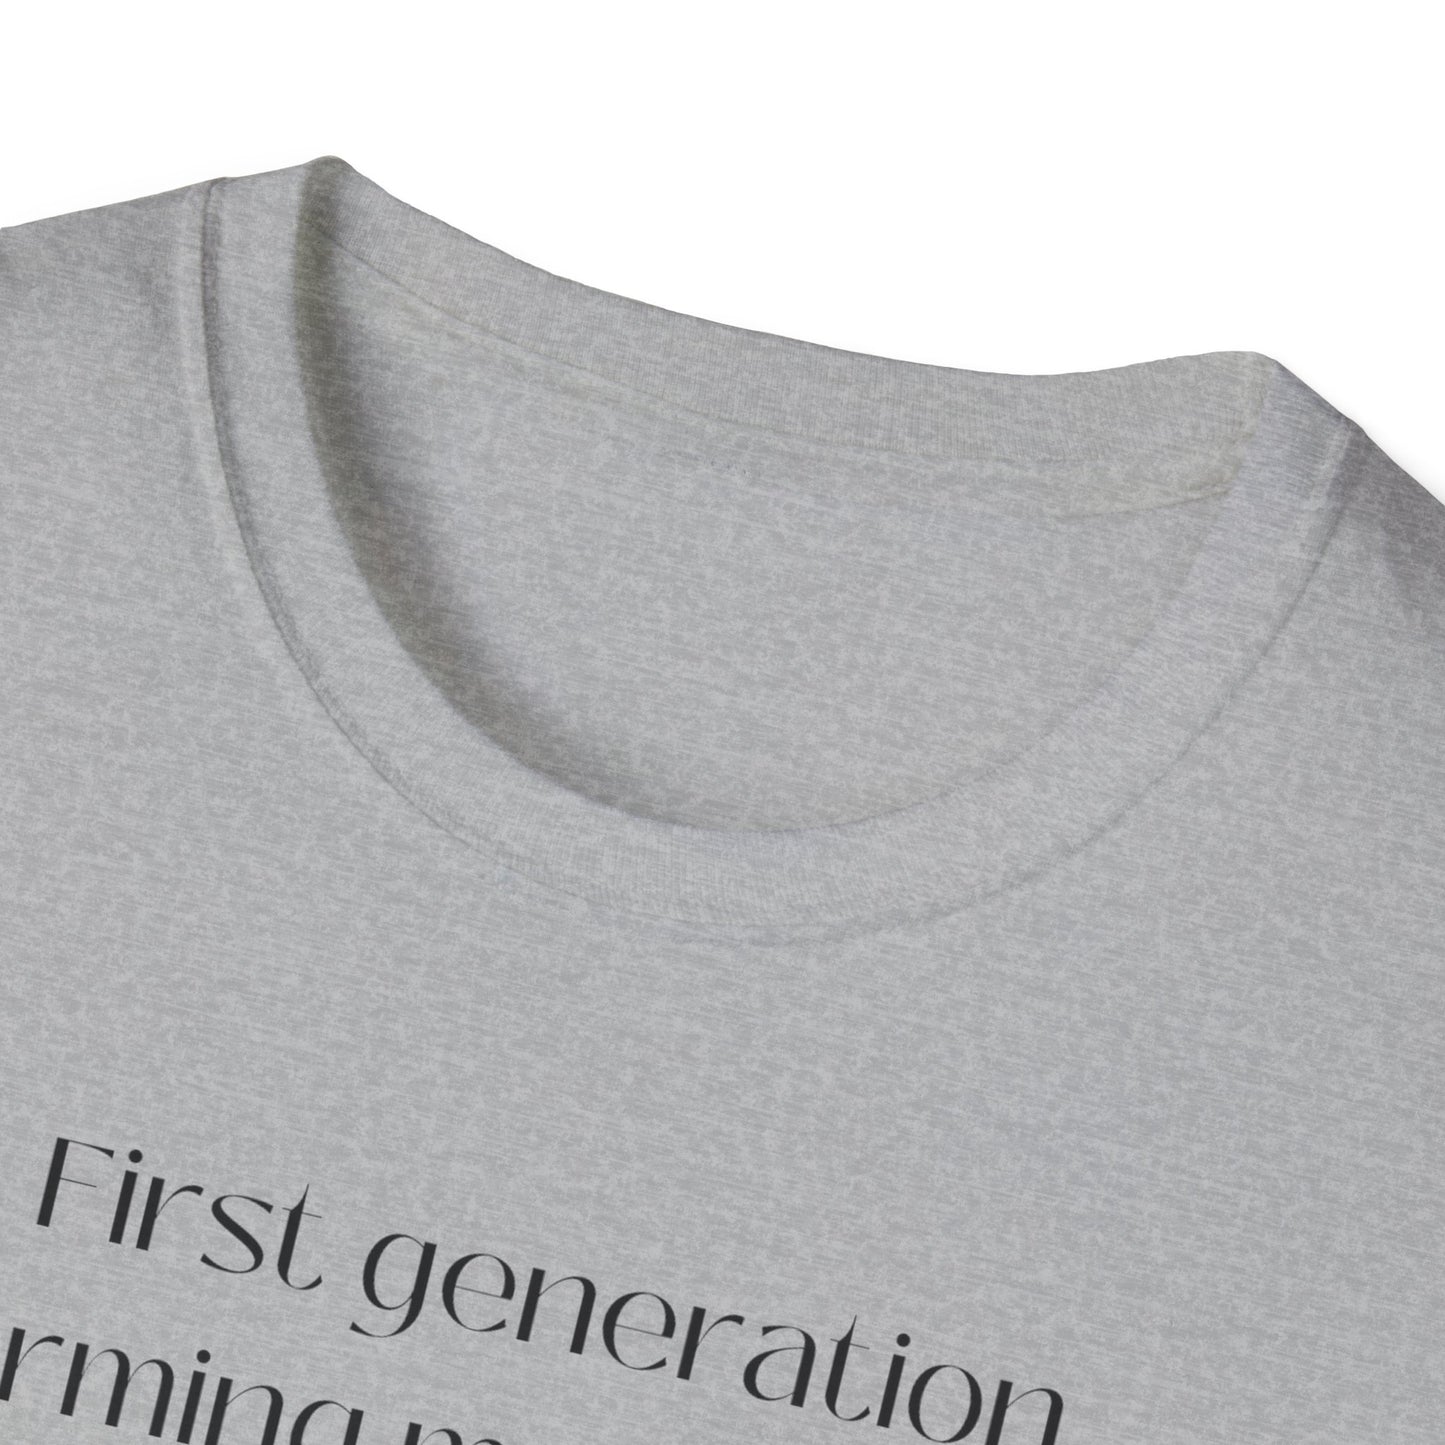 First Generation Farming shirt, first generation farming meets hand crafted quality, farming shirt, farming apparel, shirts for first generation farming, North Carolina farming, North Carolina farming shirt, T-Shirts for farmers, Homesteading t-shirt